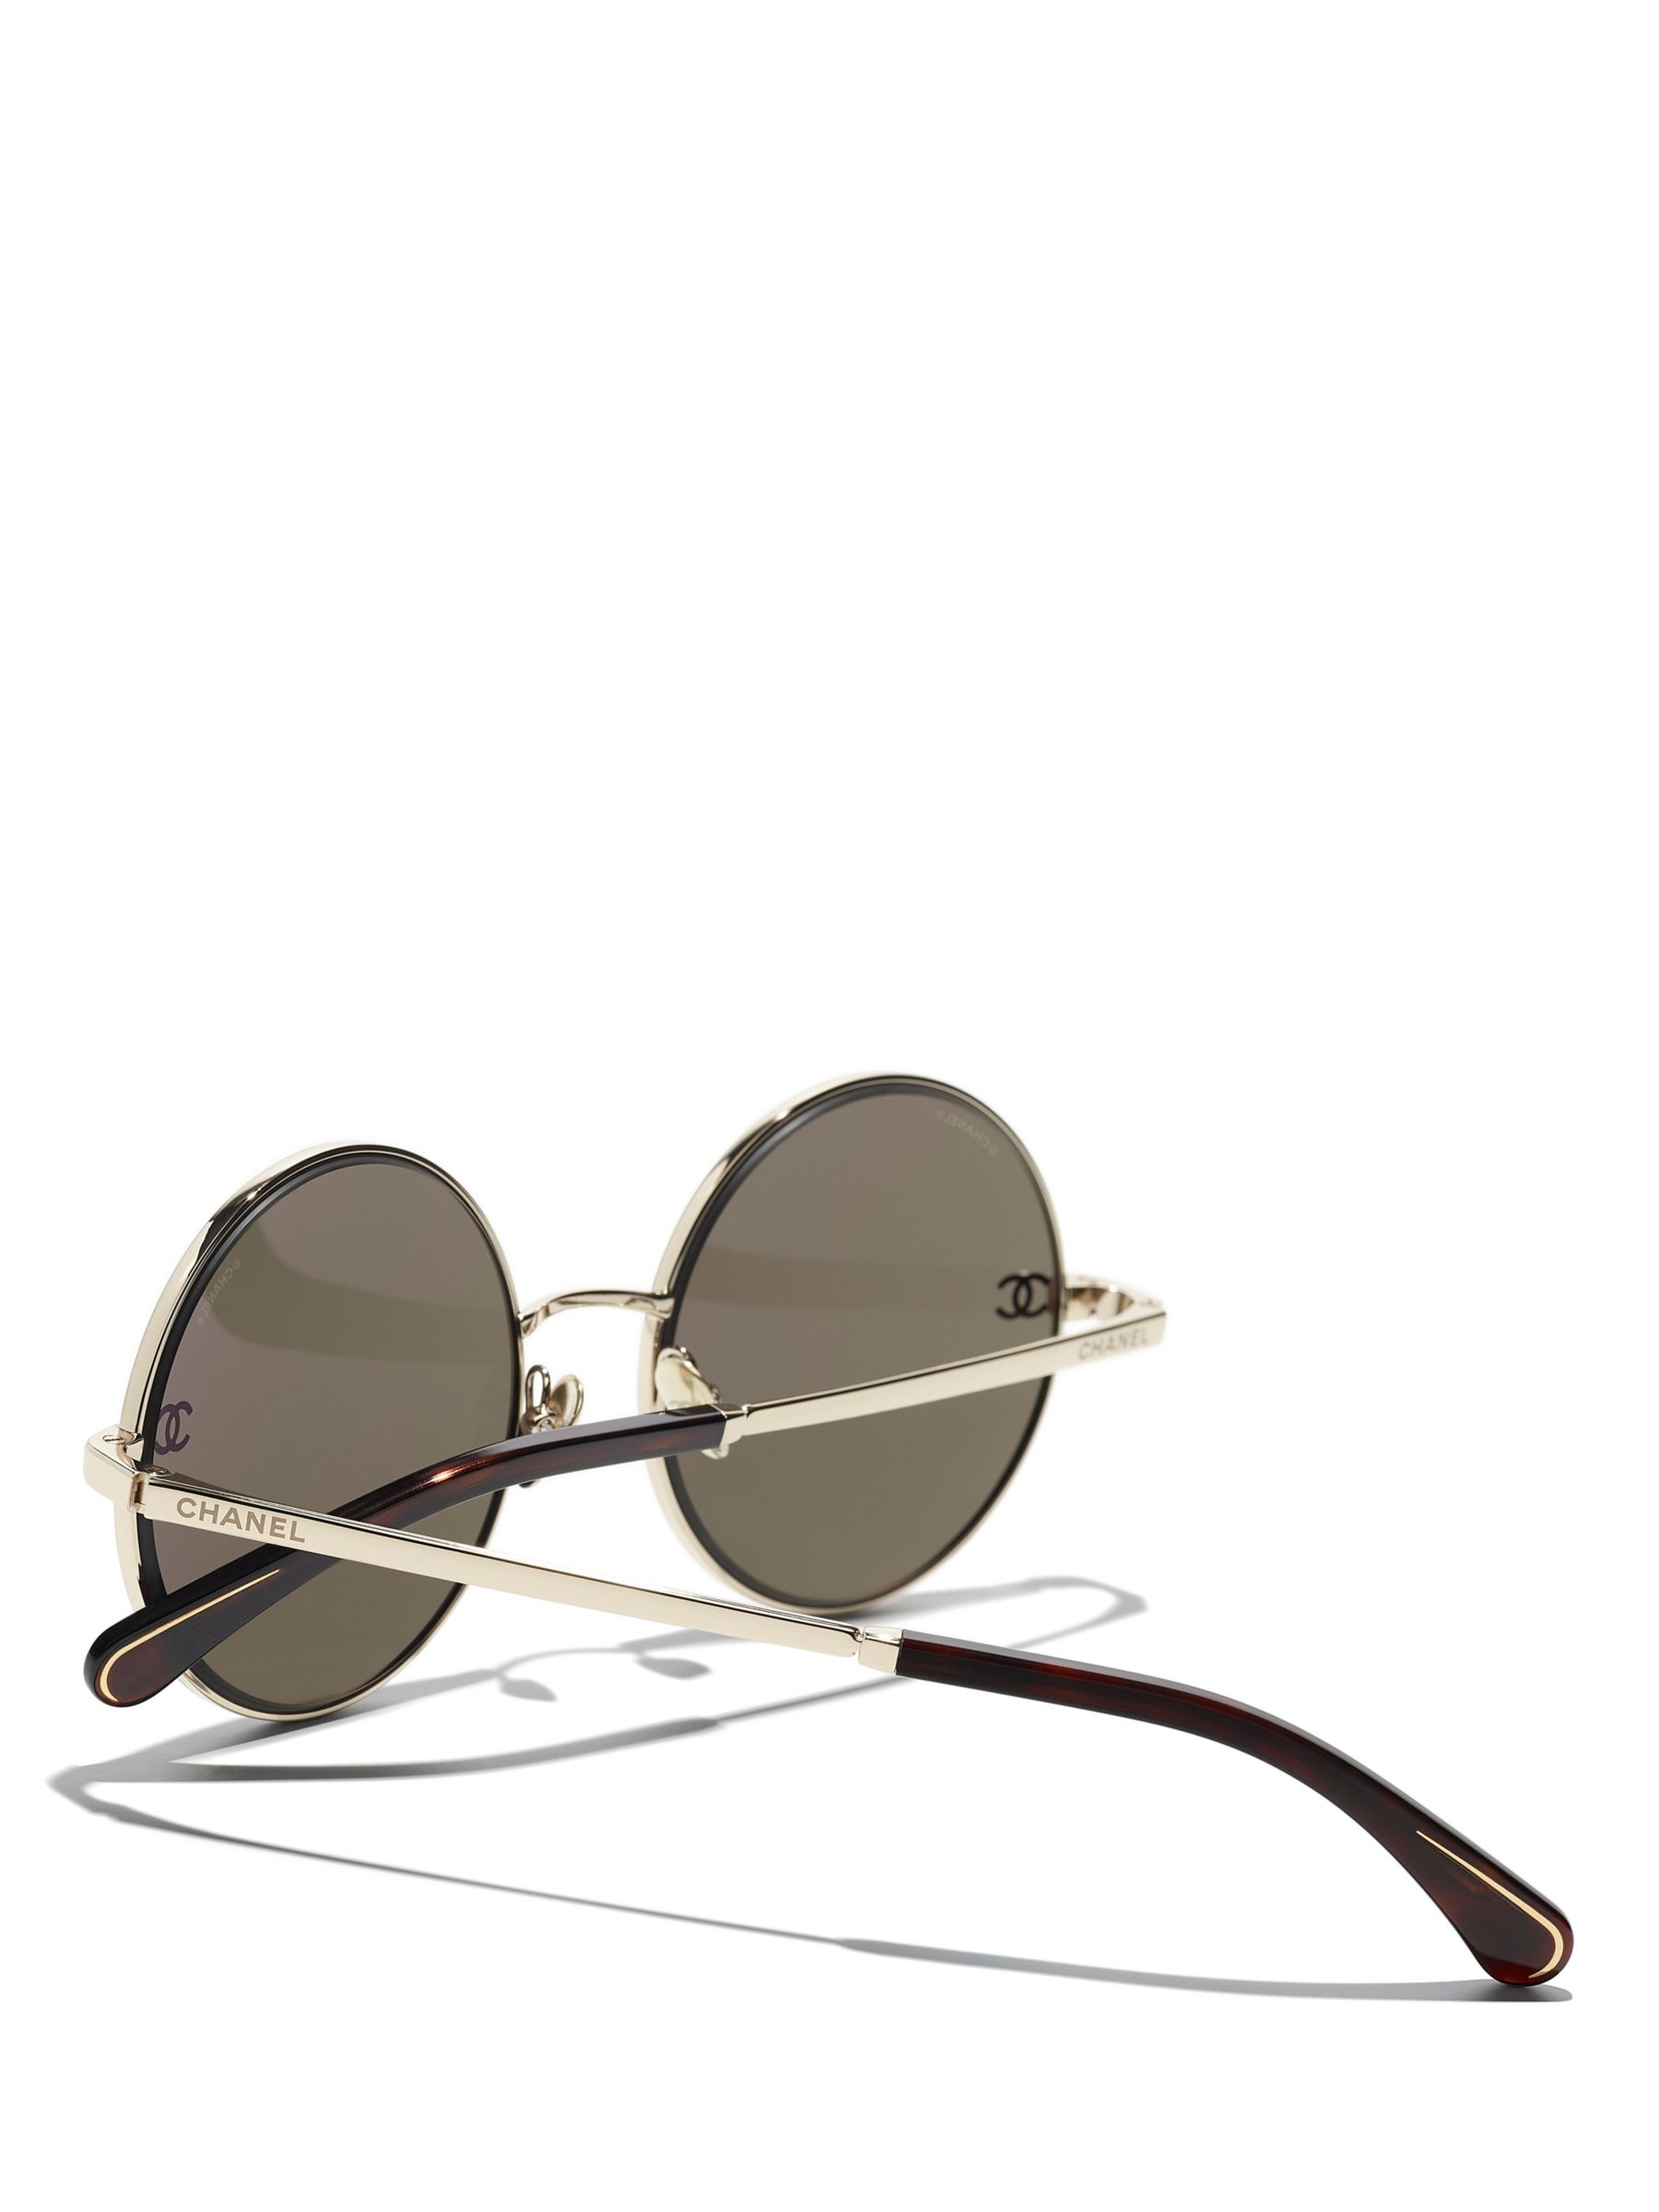 CHANEL Round Sunglasses CH4268 Shiny Gold/Brown at John Lewis & Partners